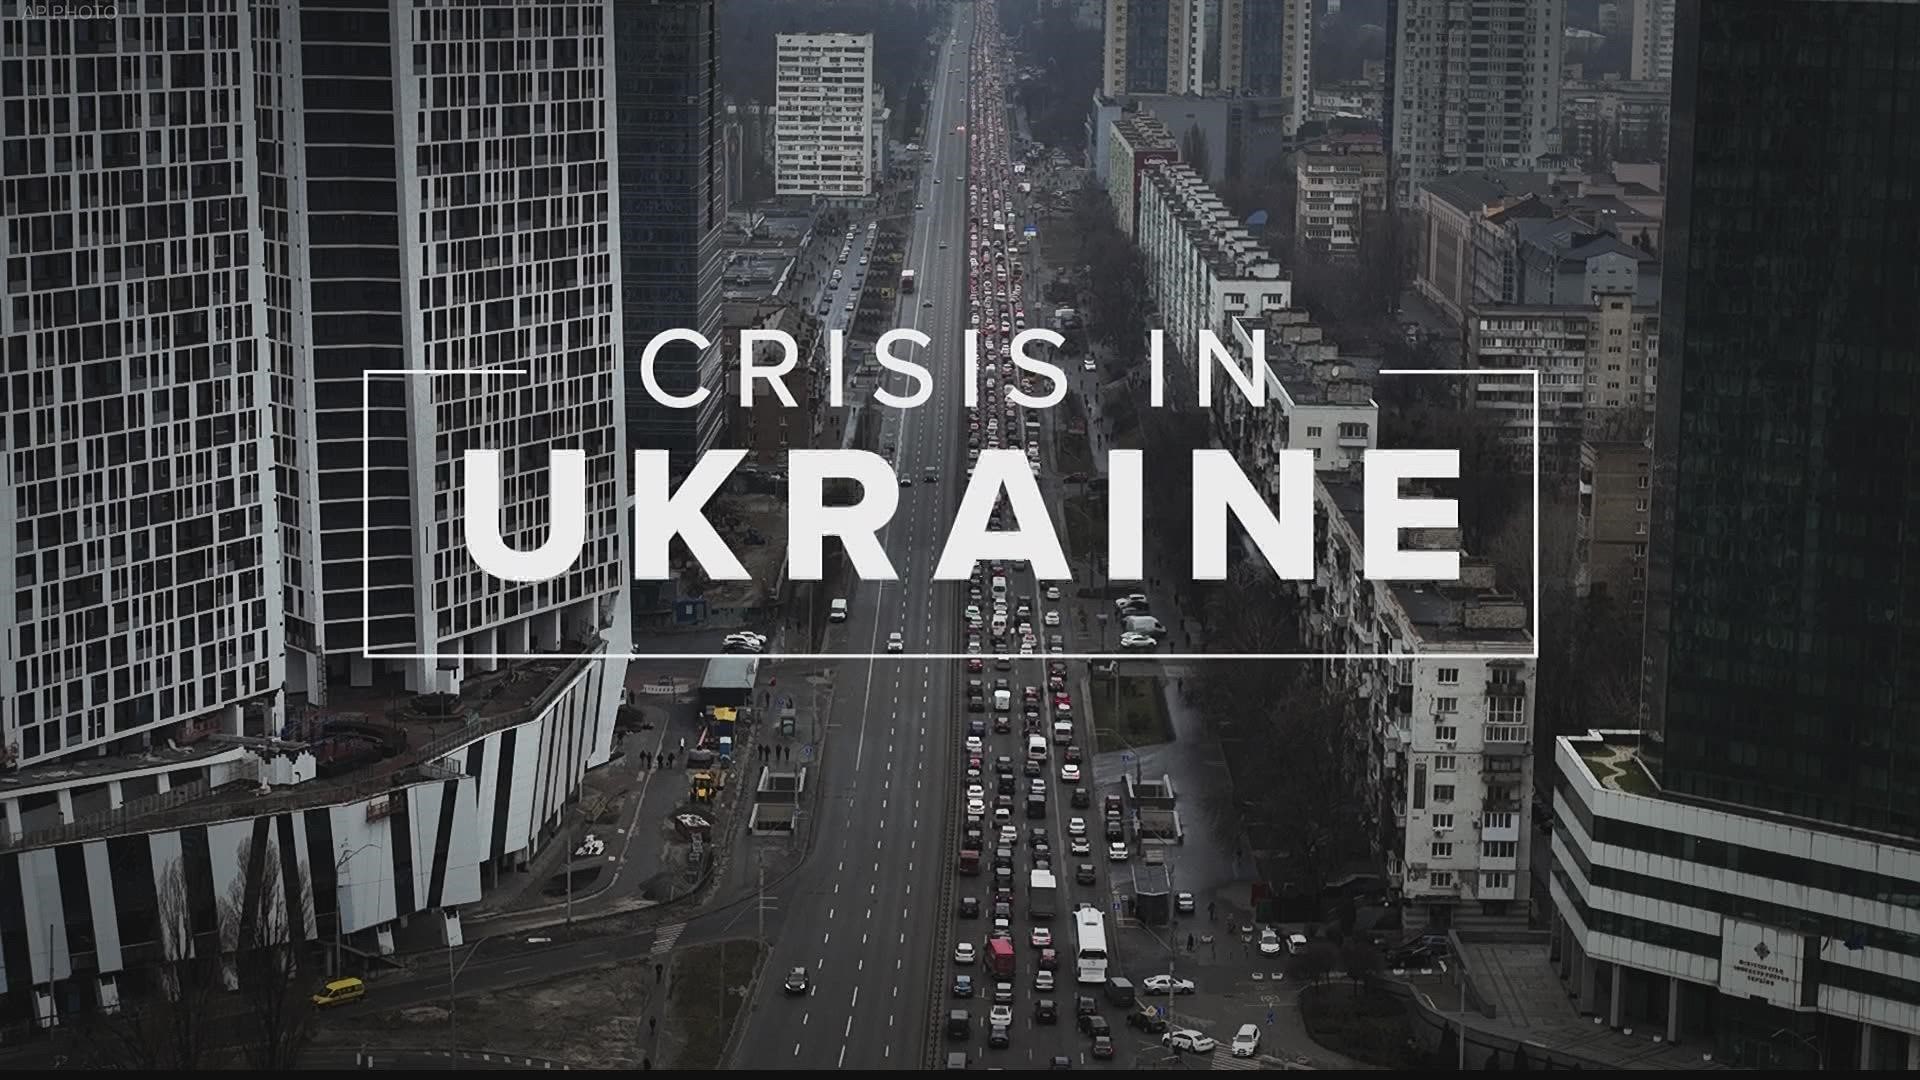 Ukraine's president warned the capital could soon face a major attack.